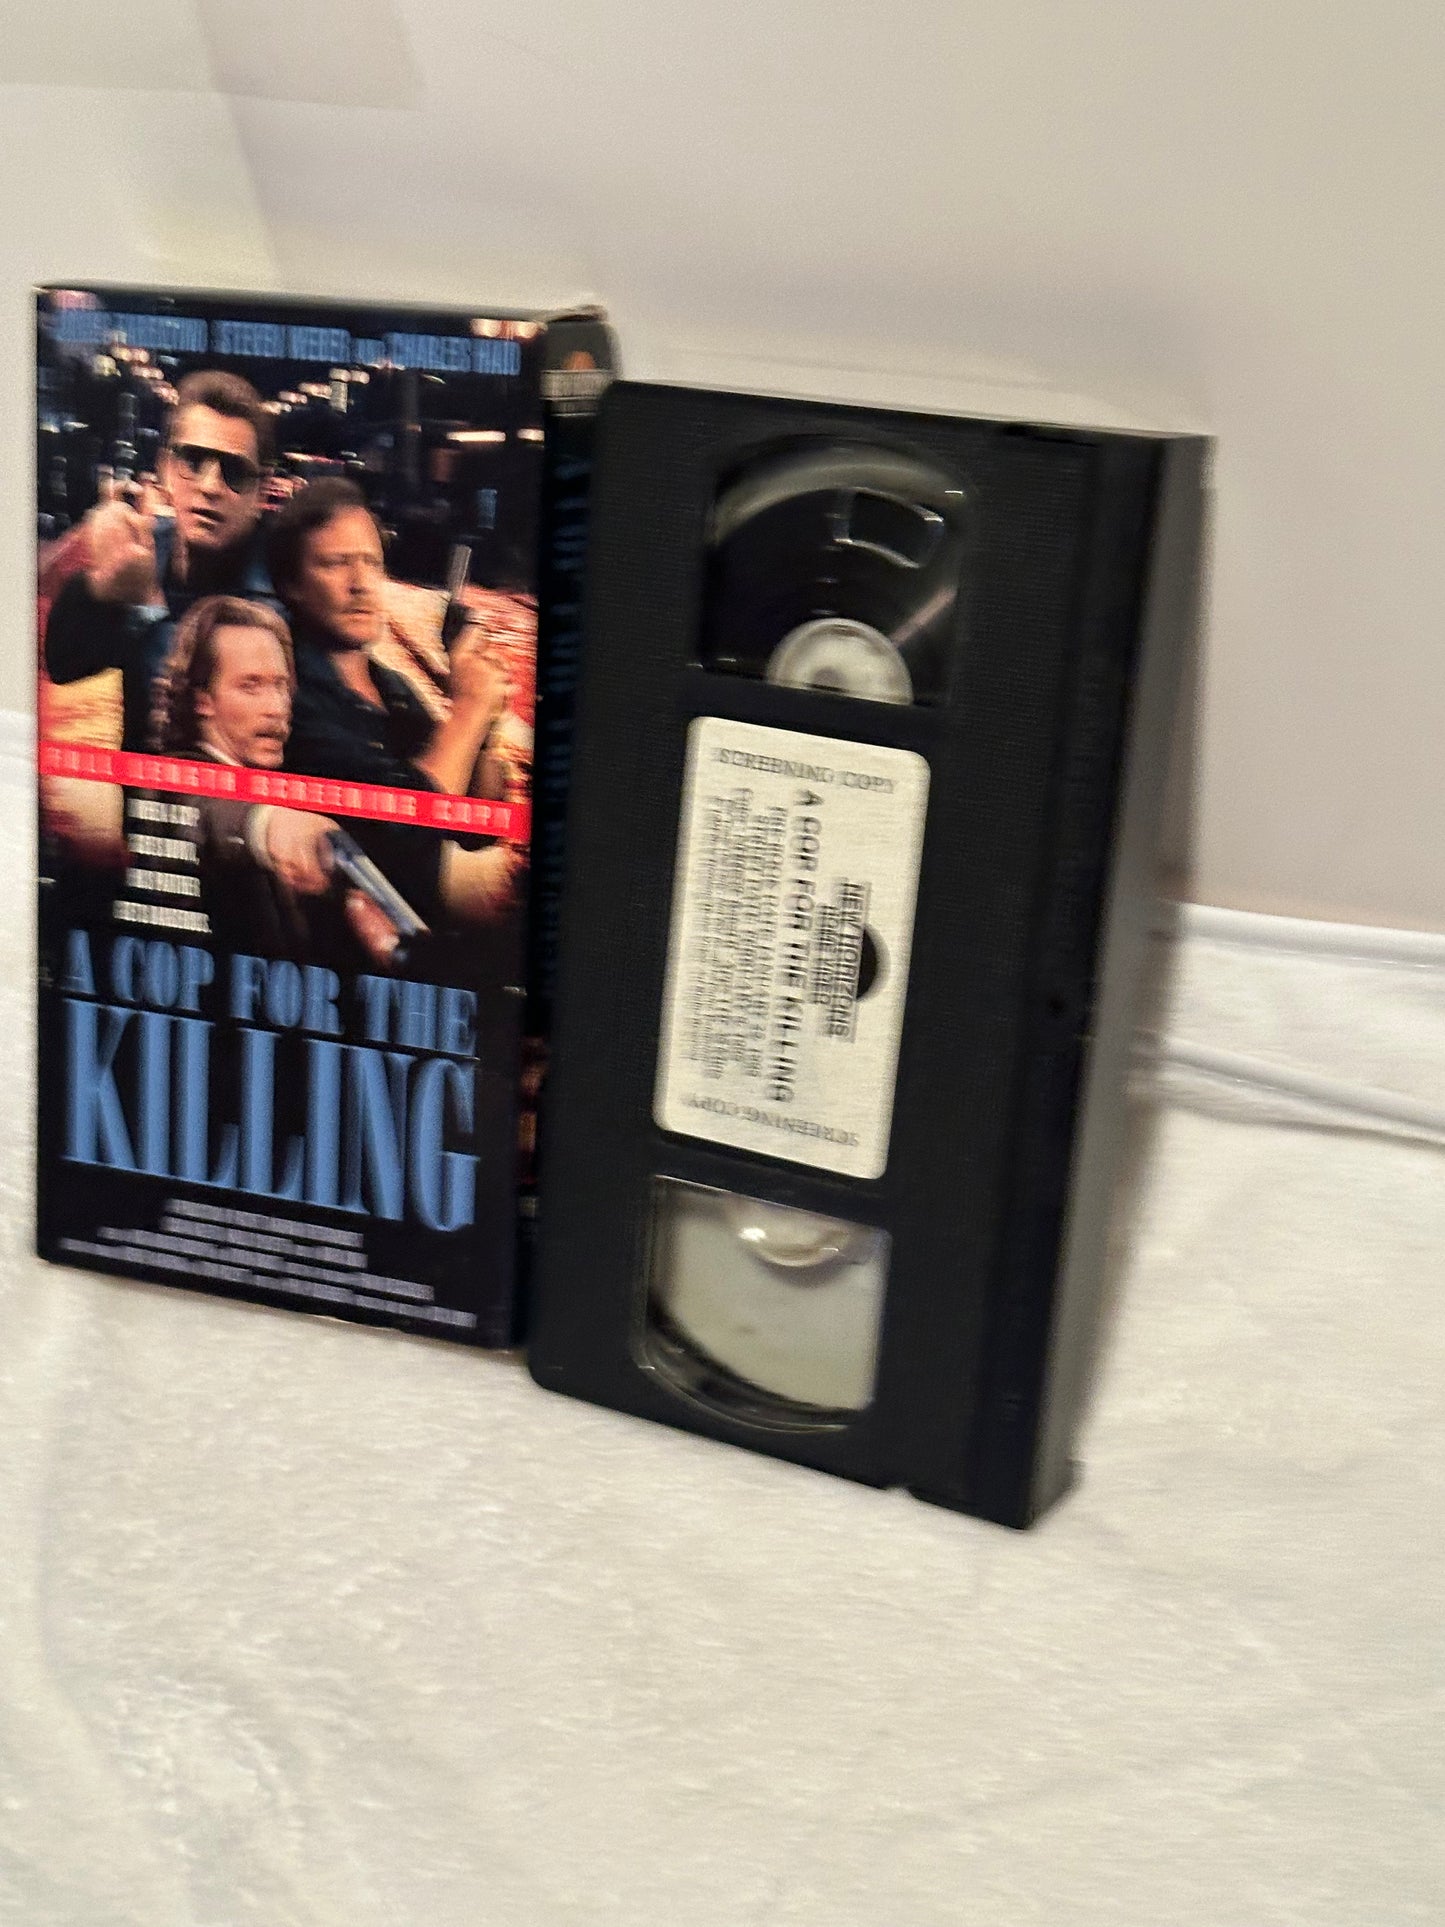 Vintage VHS Tape: A Cup for the Killing